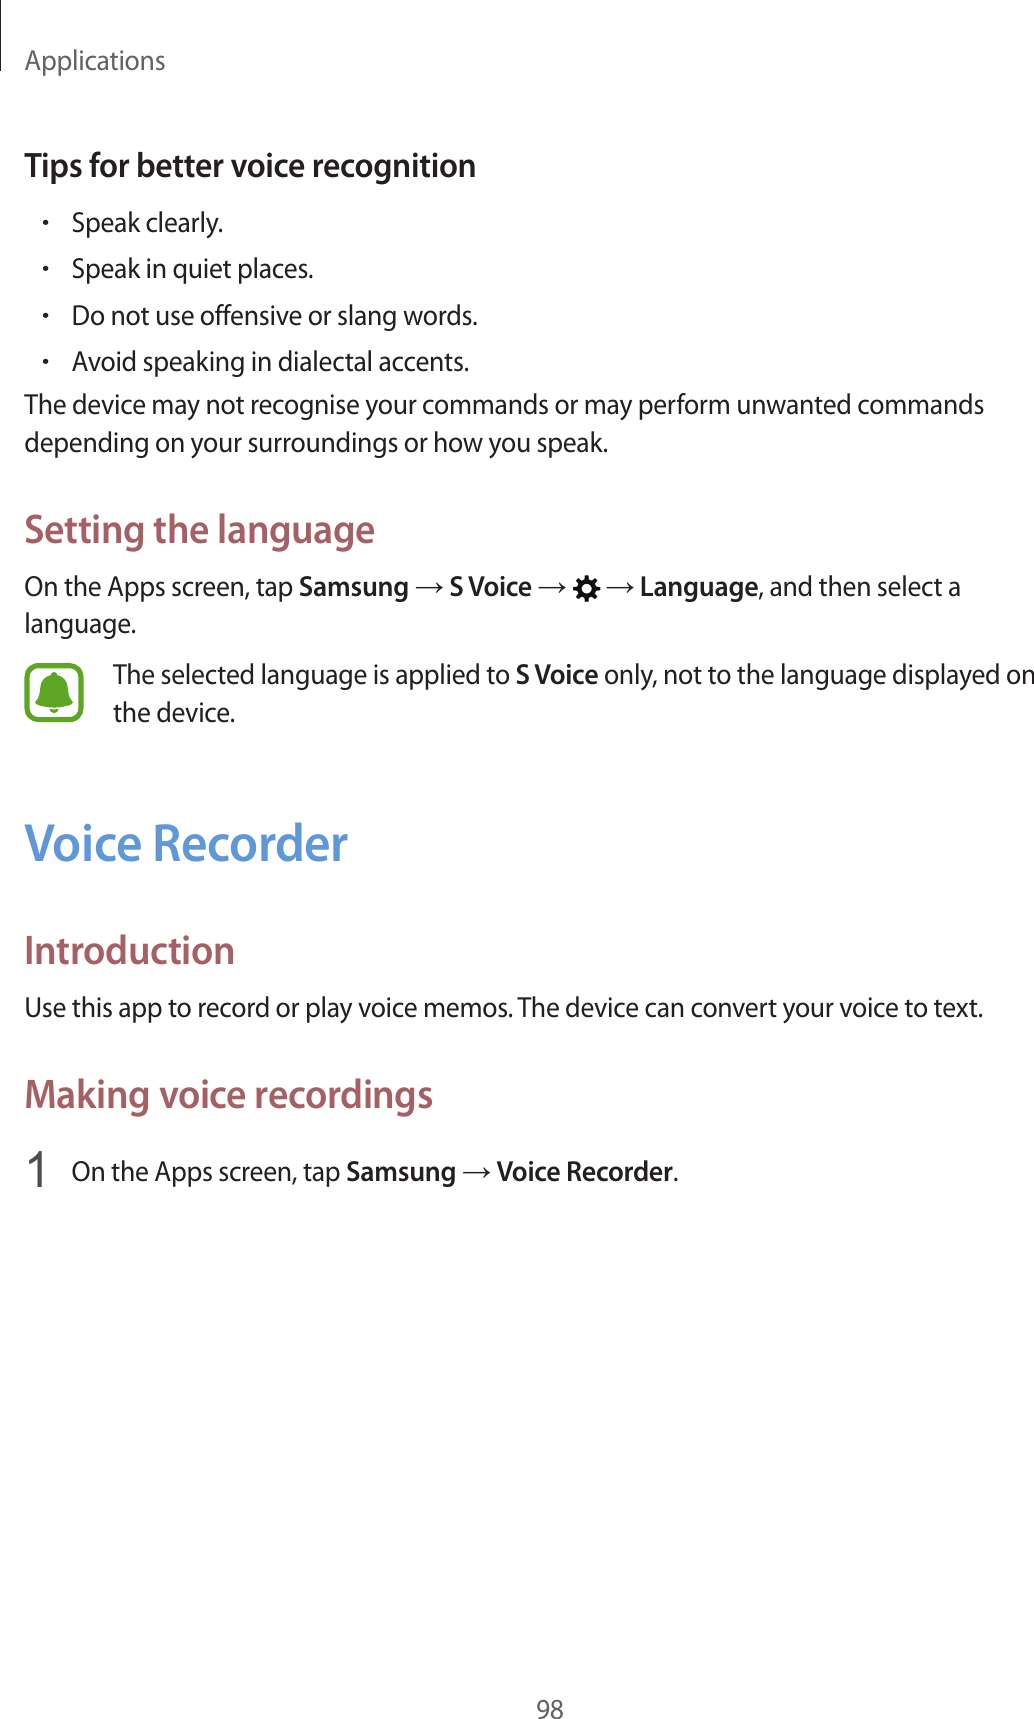 Applications98Tips for better voice recognition•Speak clearly.•Speak in quiet places.•Do not use offensive or slang words.•Avoid speaking in dialectal accents.The device may not recognise your commands or may perform unwanted commands depending on your surroundings or how you speak.Setting the languageOn the Apps screen, tap Samsung → S Voice →   → Language, and then select a language.The selected language is applied to S Voice only, not to the language displayed on the device.Voice RecorderIntroductionUse this app to record or play voice memos. The device can convert your voice to text.Making voice recordings1  On the Apps screen, tap Samsung → Voice Recorder.